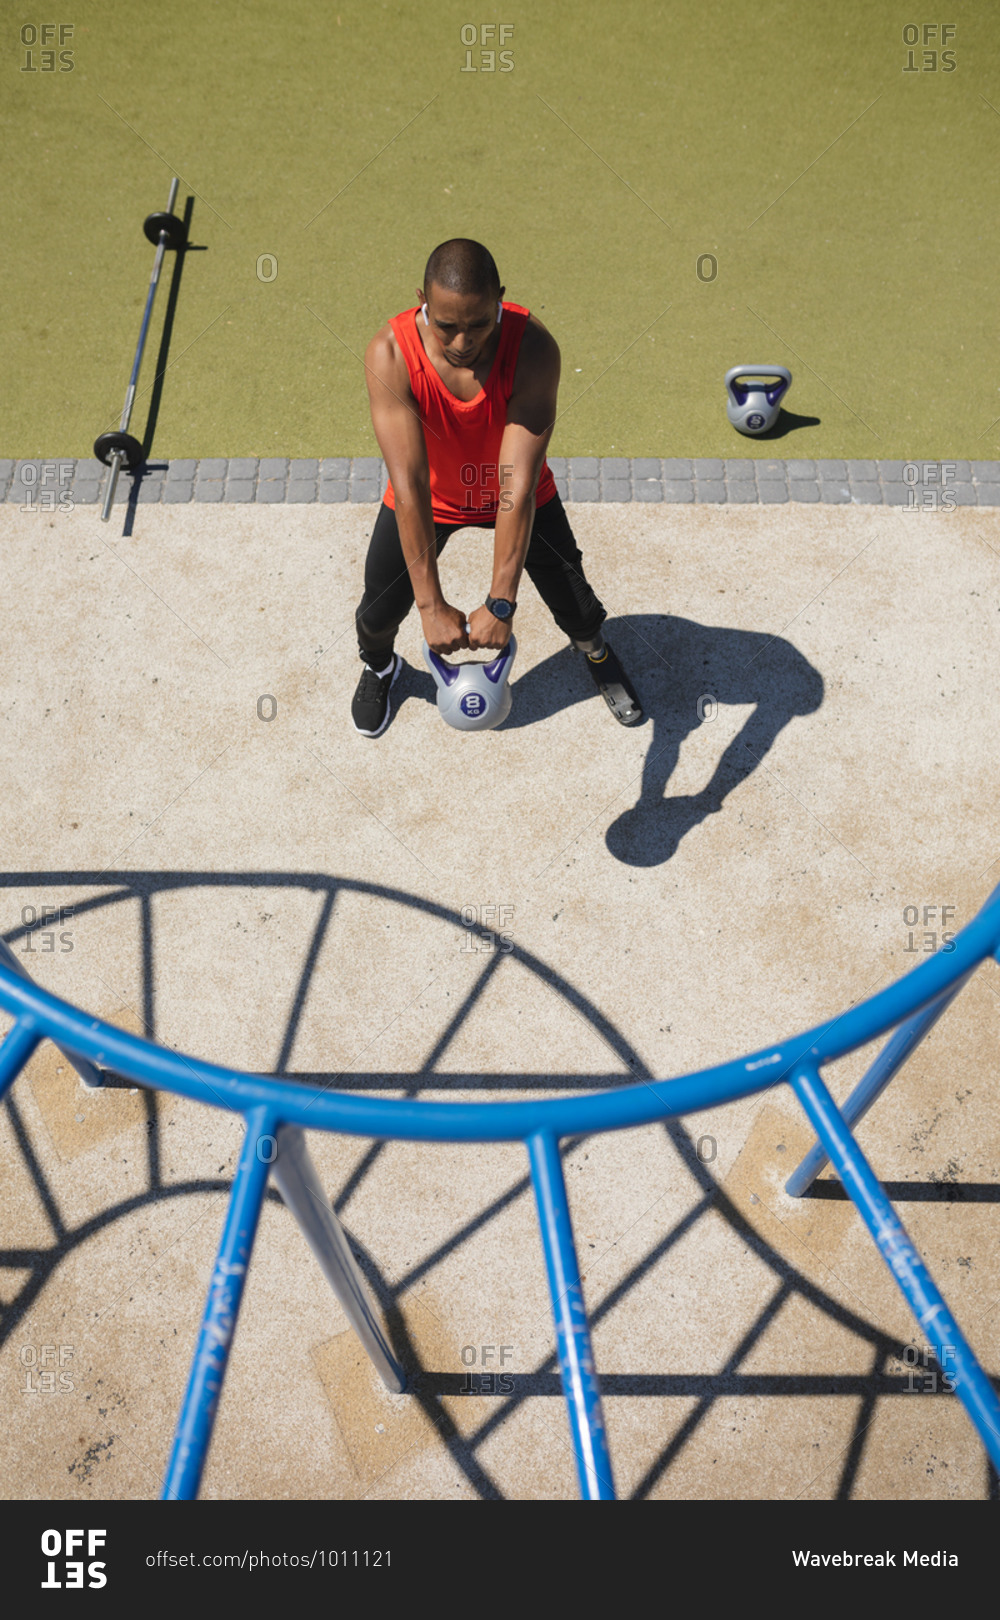 High angle view of disabled mixed race man with a prosthetic running blade working out at an outdoor gym wearing wireless earphones, swinging a kettlebell weight. Fitness disability healthy lifestyle.